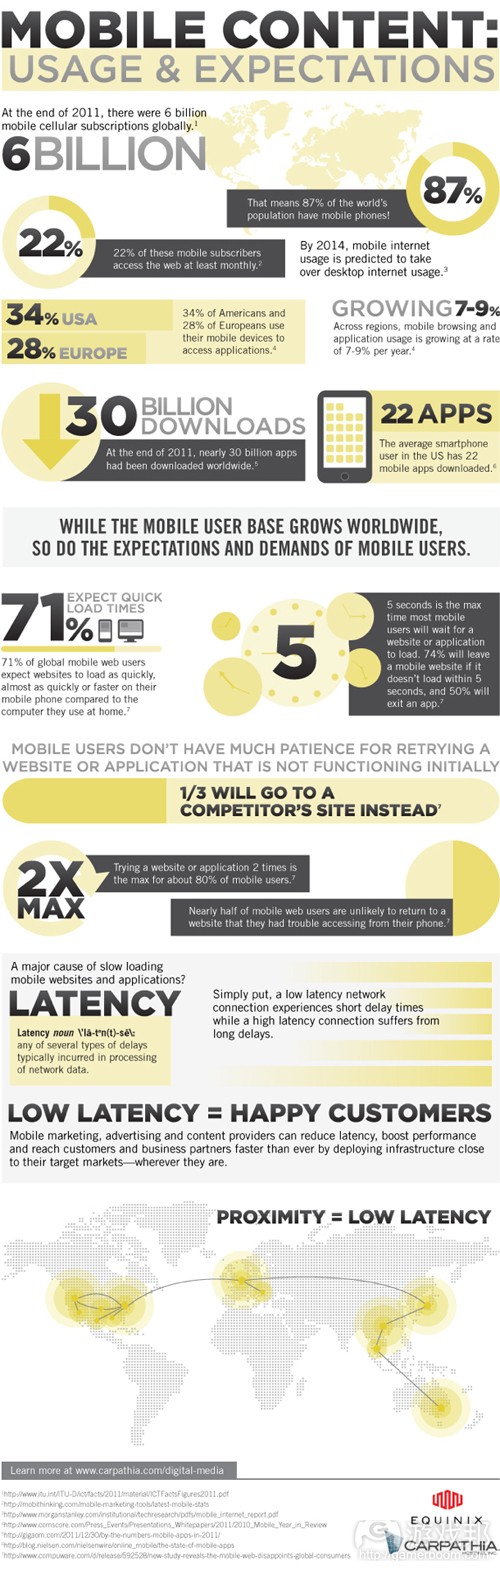 MobileContent_infographic(from Compuware)